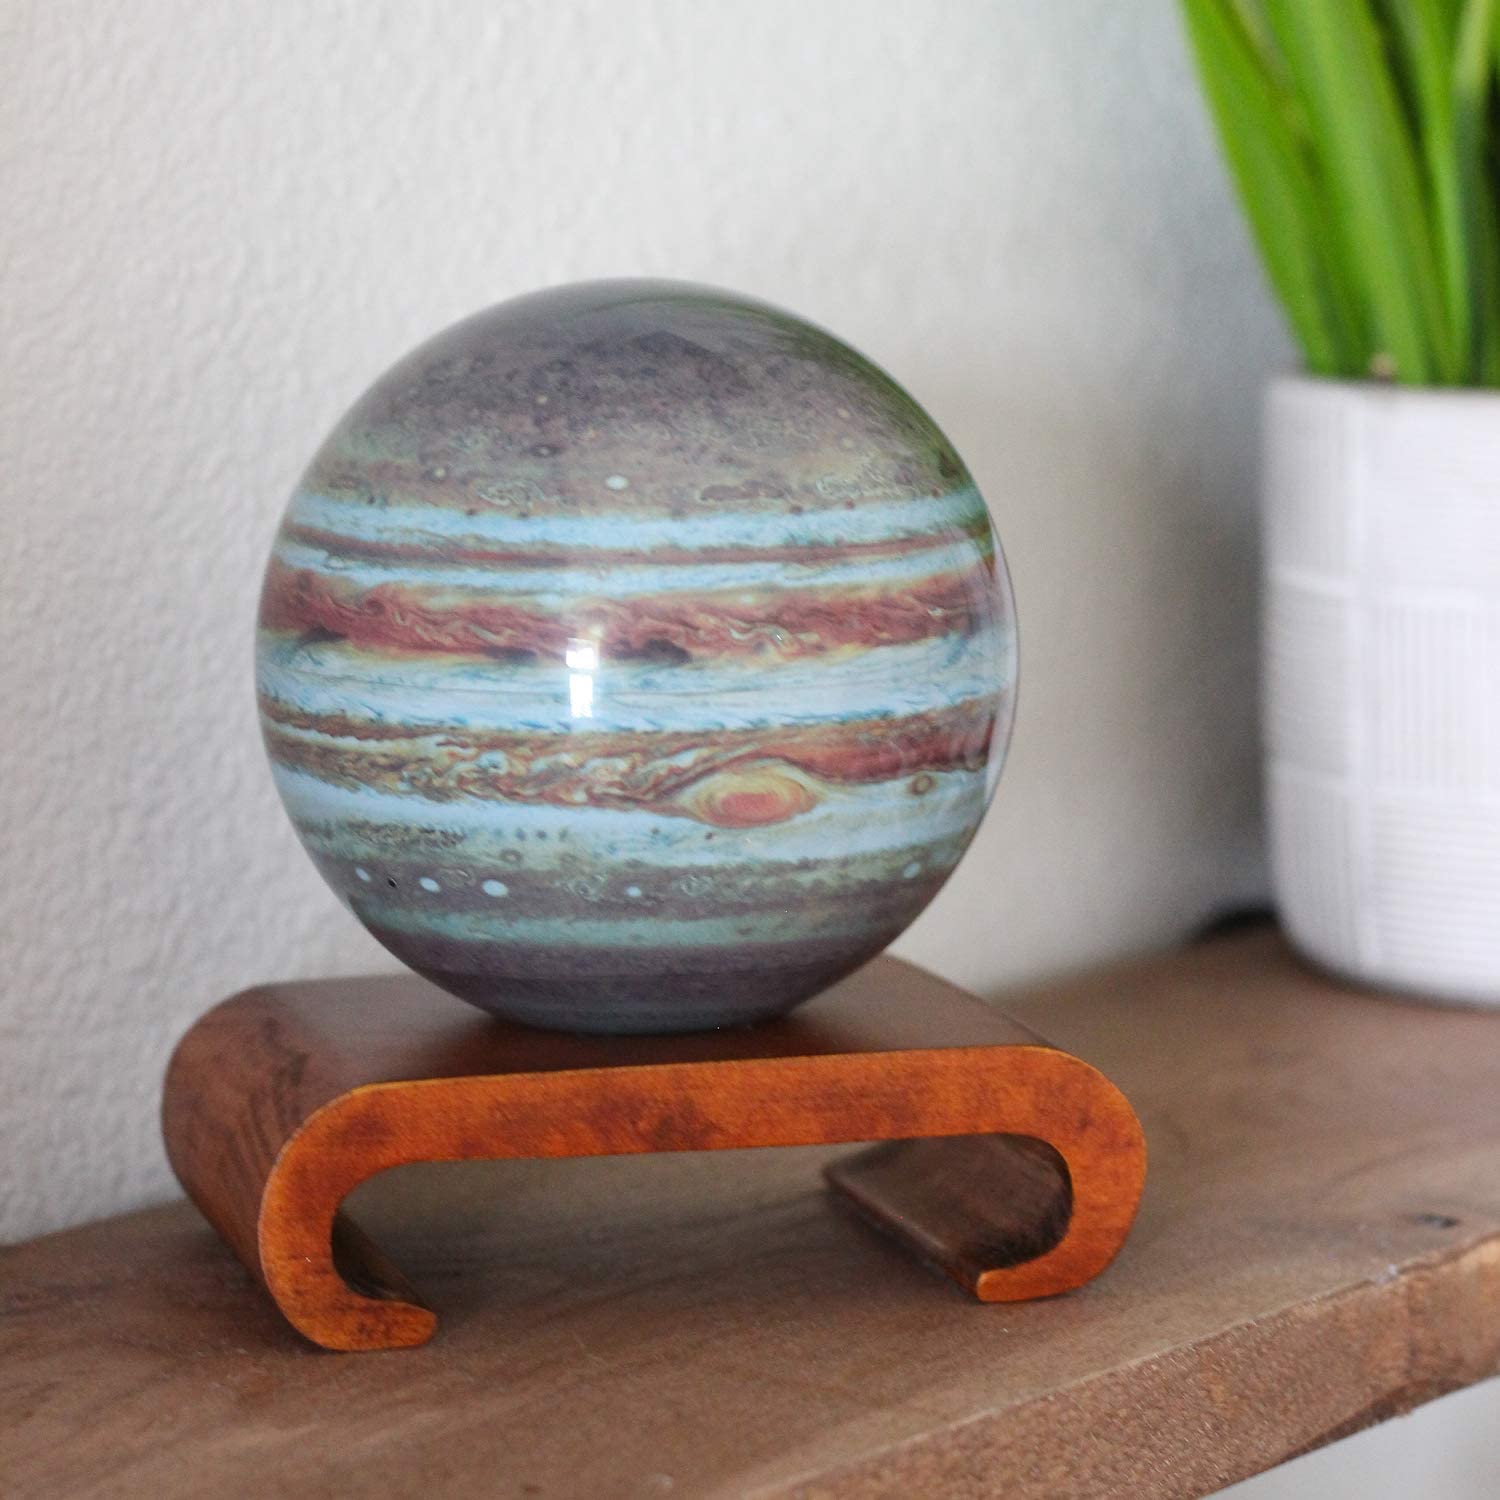 A spinning version of planet Jupiter on a wooden stand.